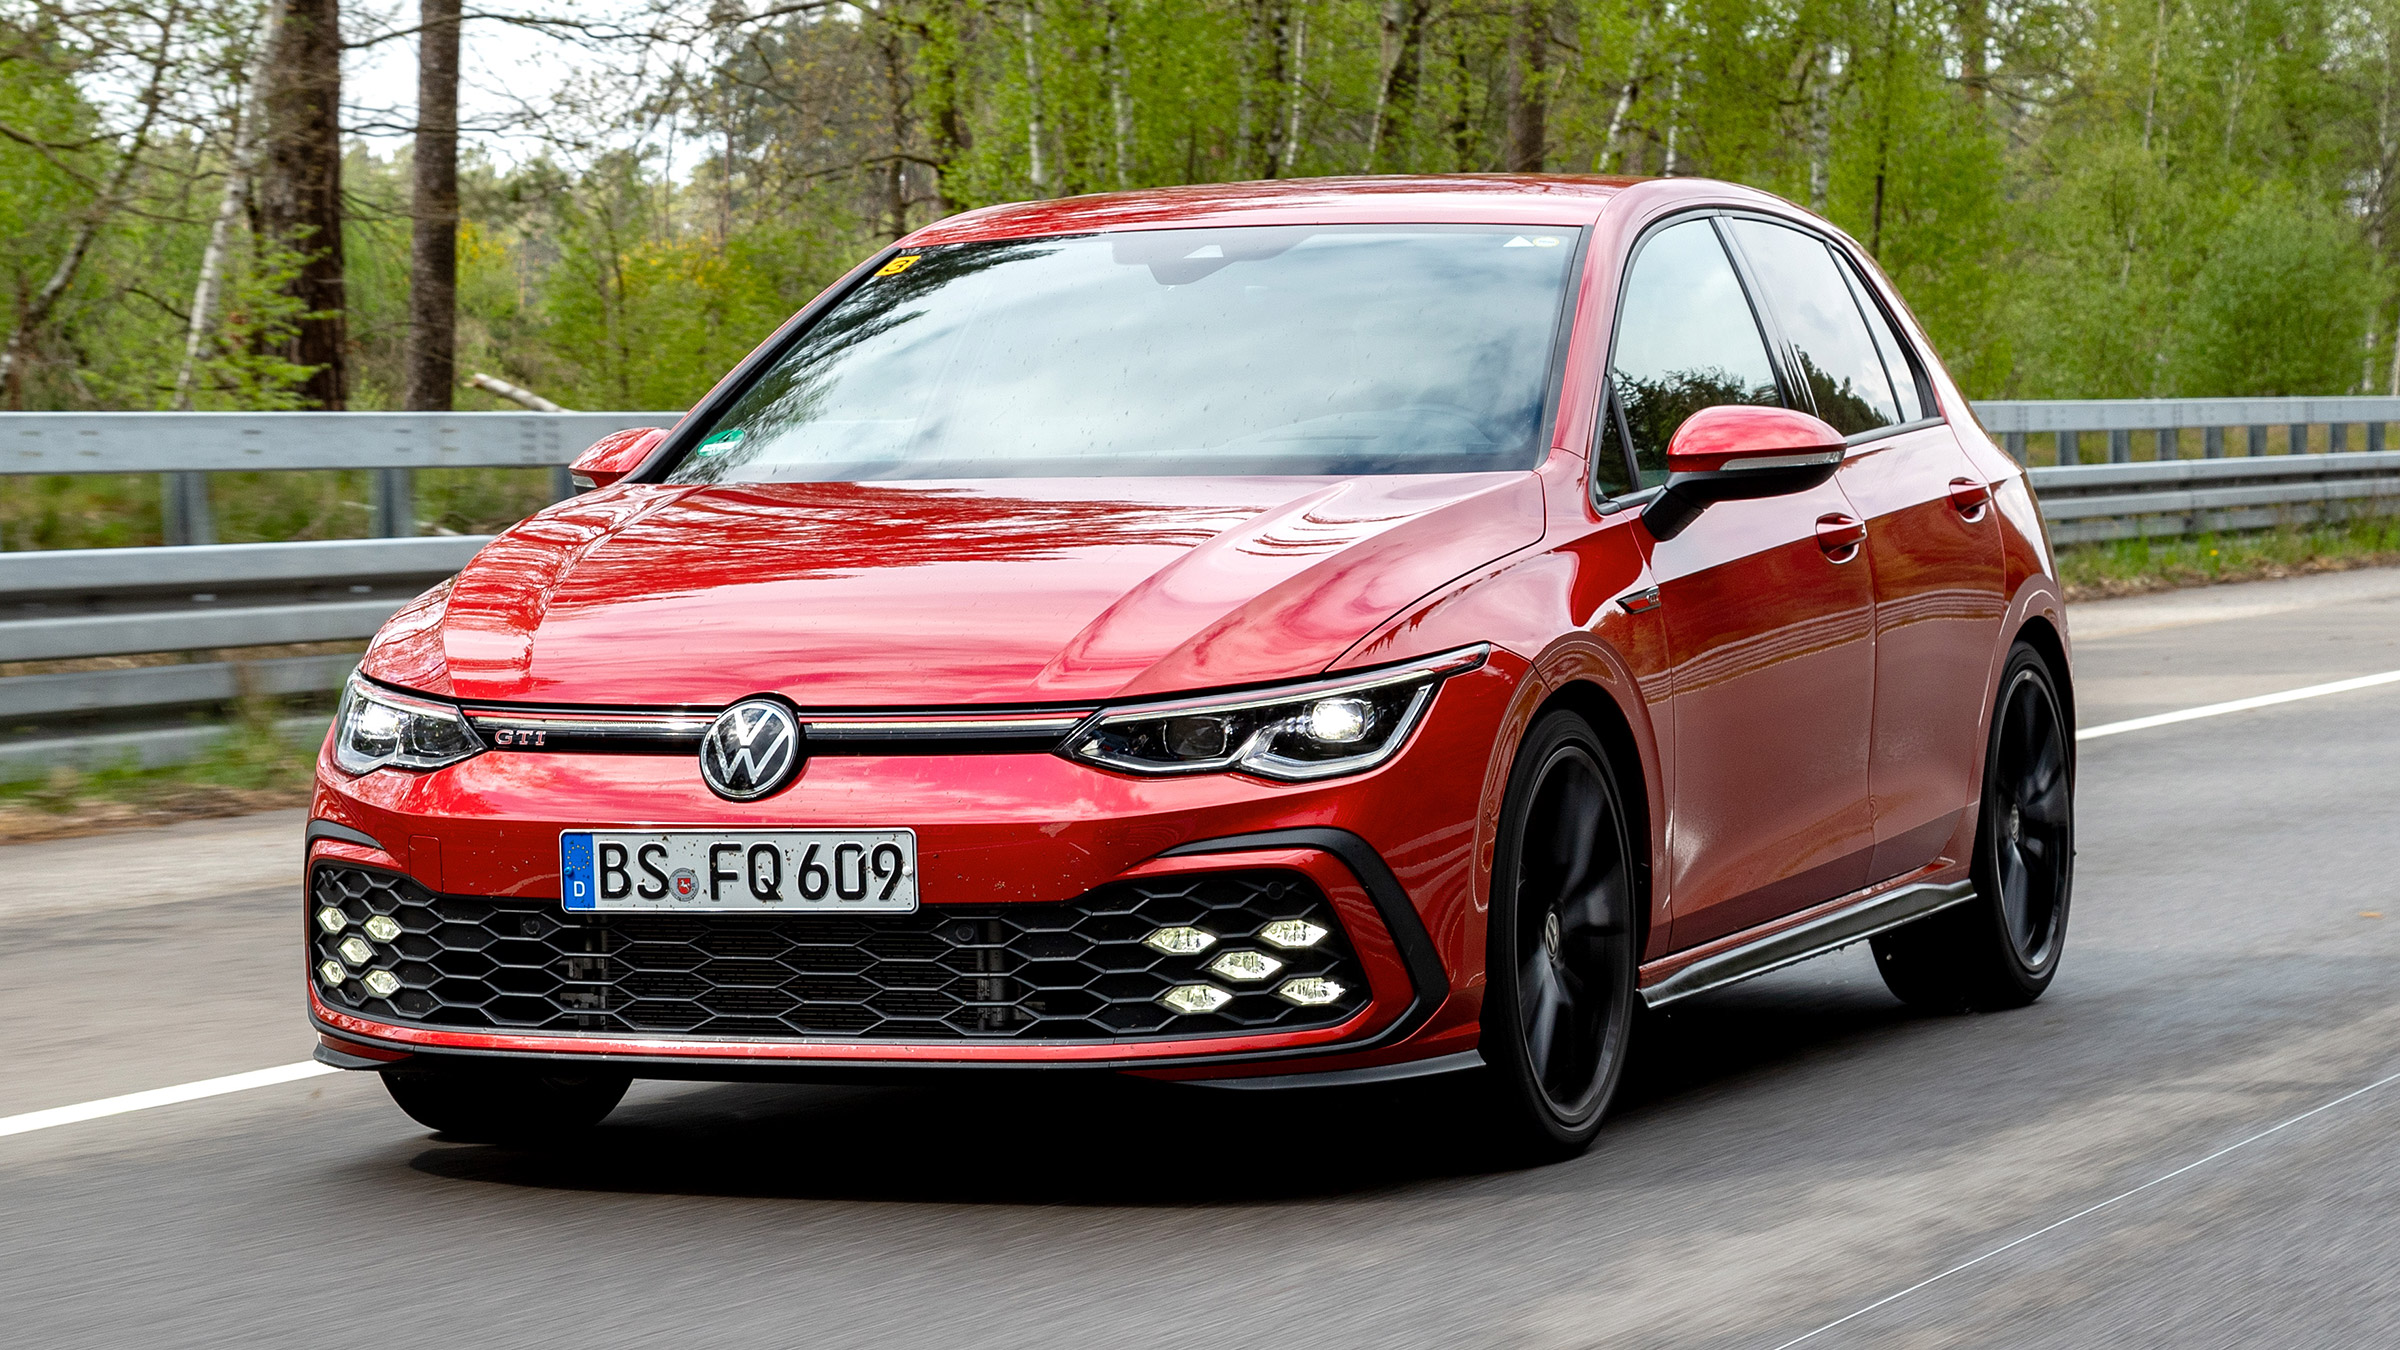 New Volkswagen Golf Gti Images and Photos finder